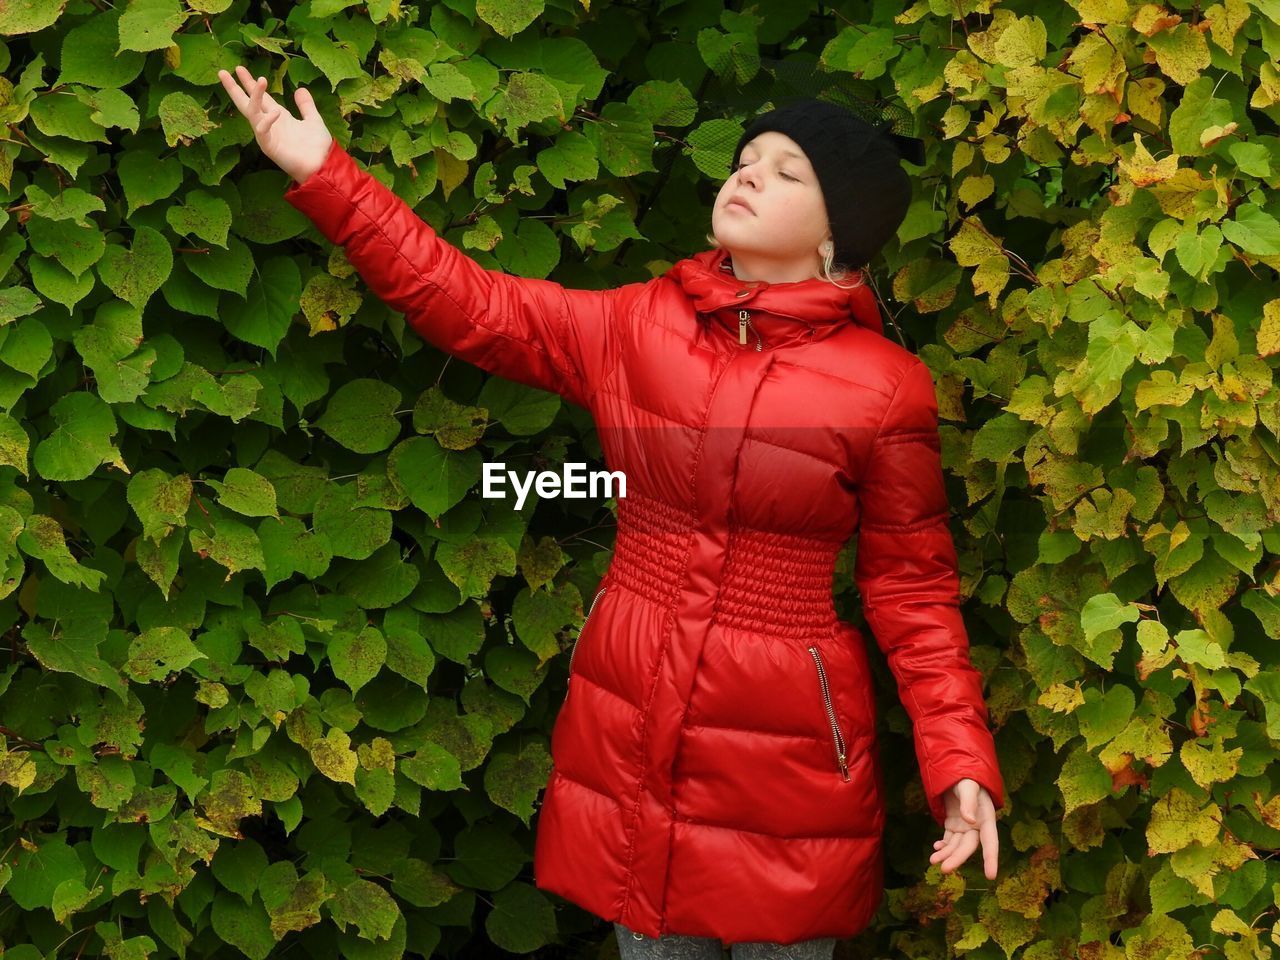 Girl in red jacket standing against plants